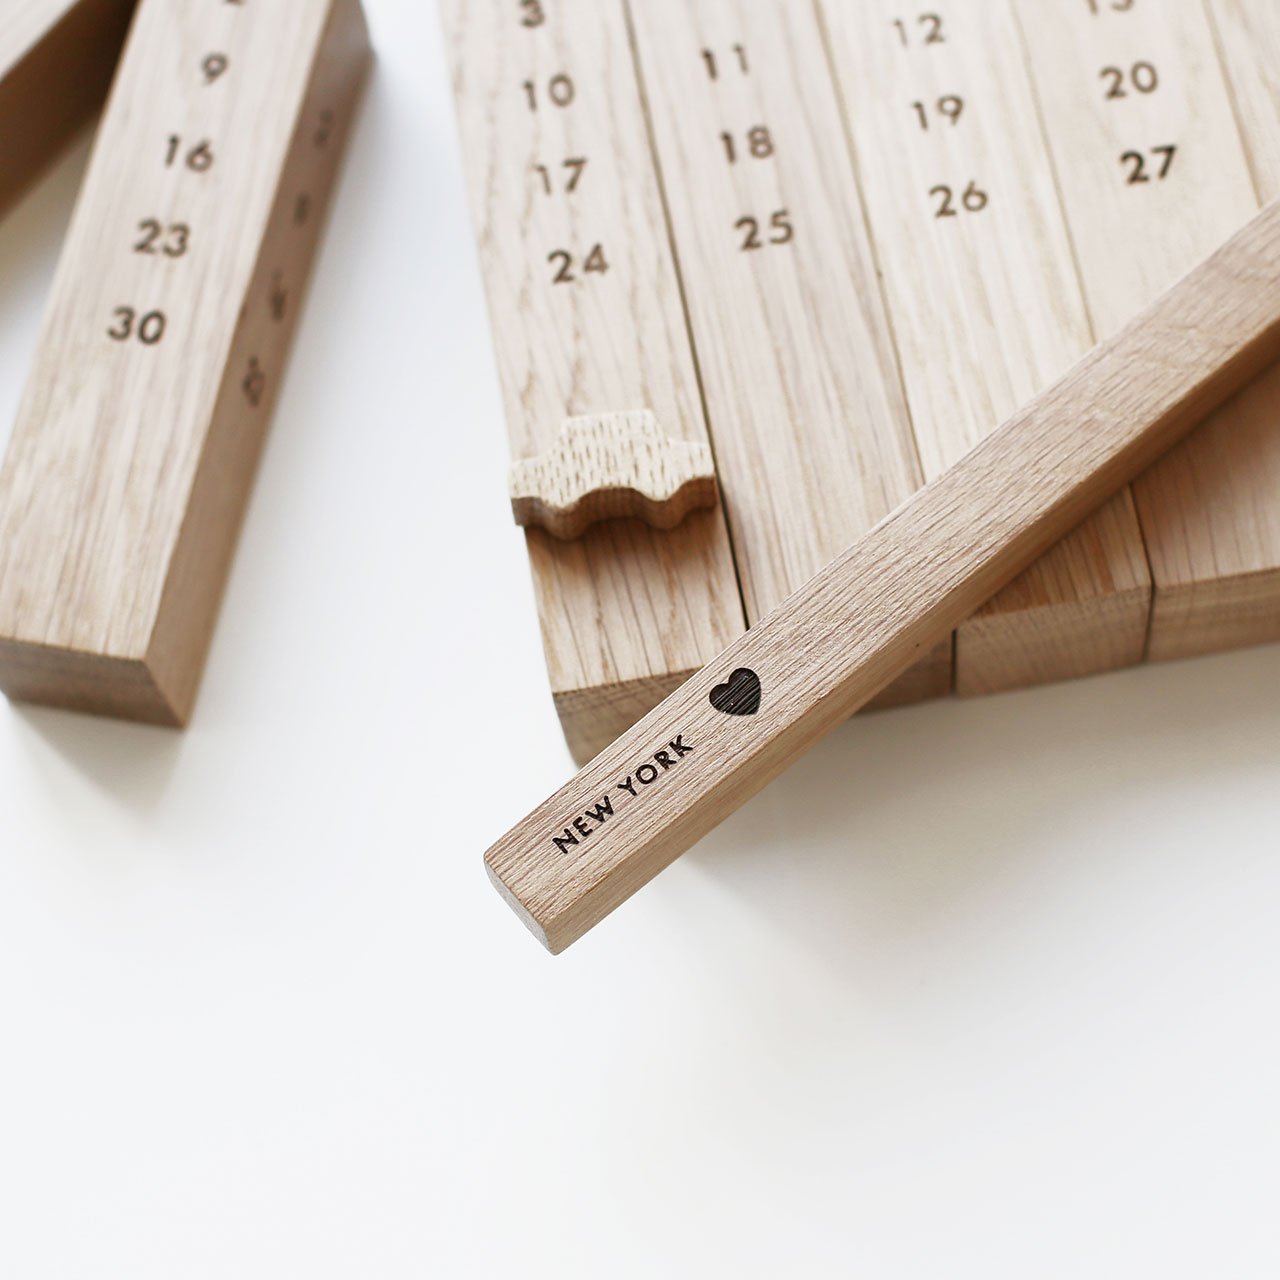 Wooden calendar "New York" by 52 FACTORY. Photo courtesy 52 FACTORY.